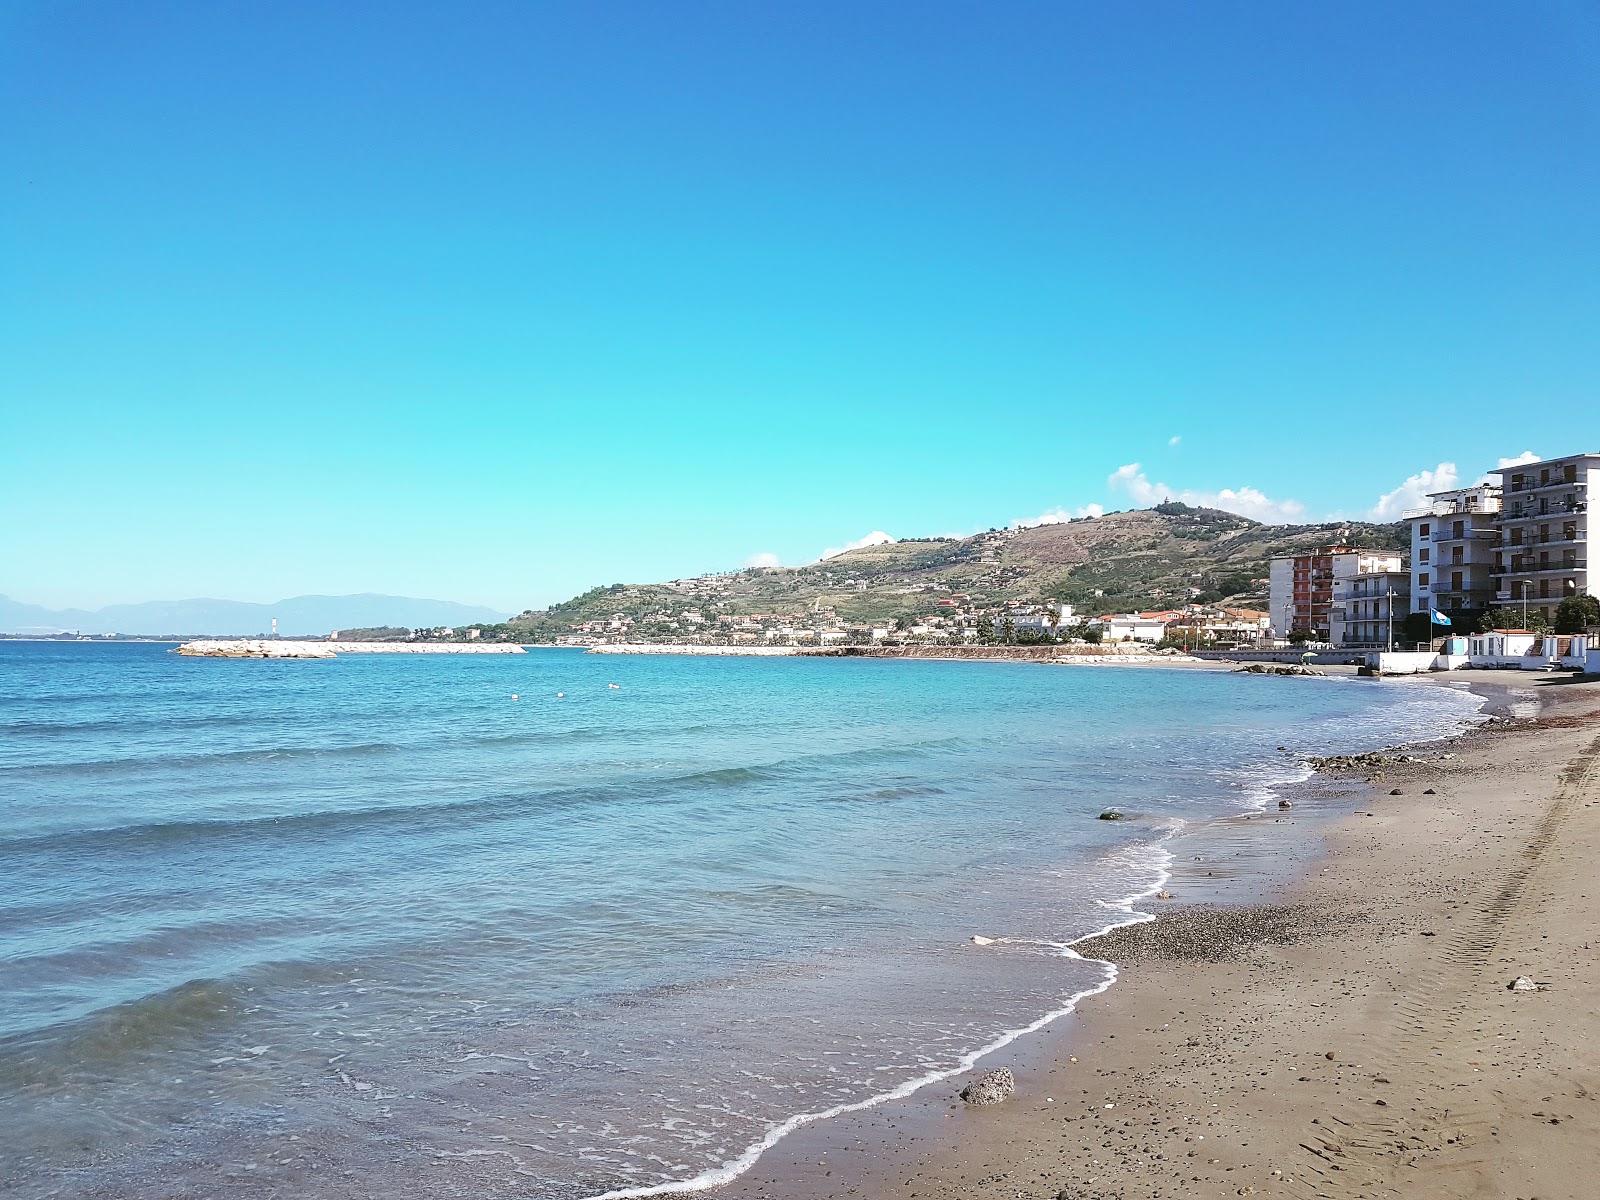 Photo of Agropoli beach with blue water surface